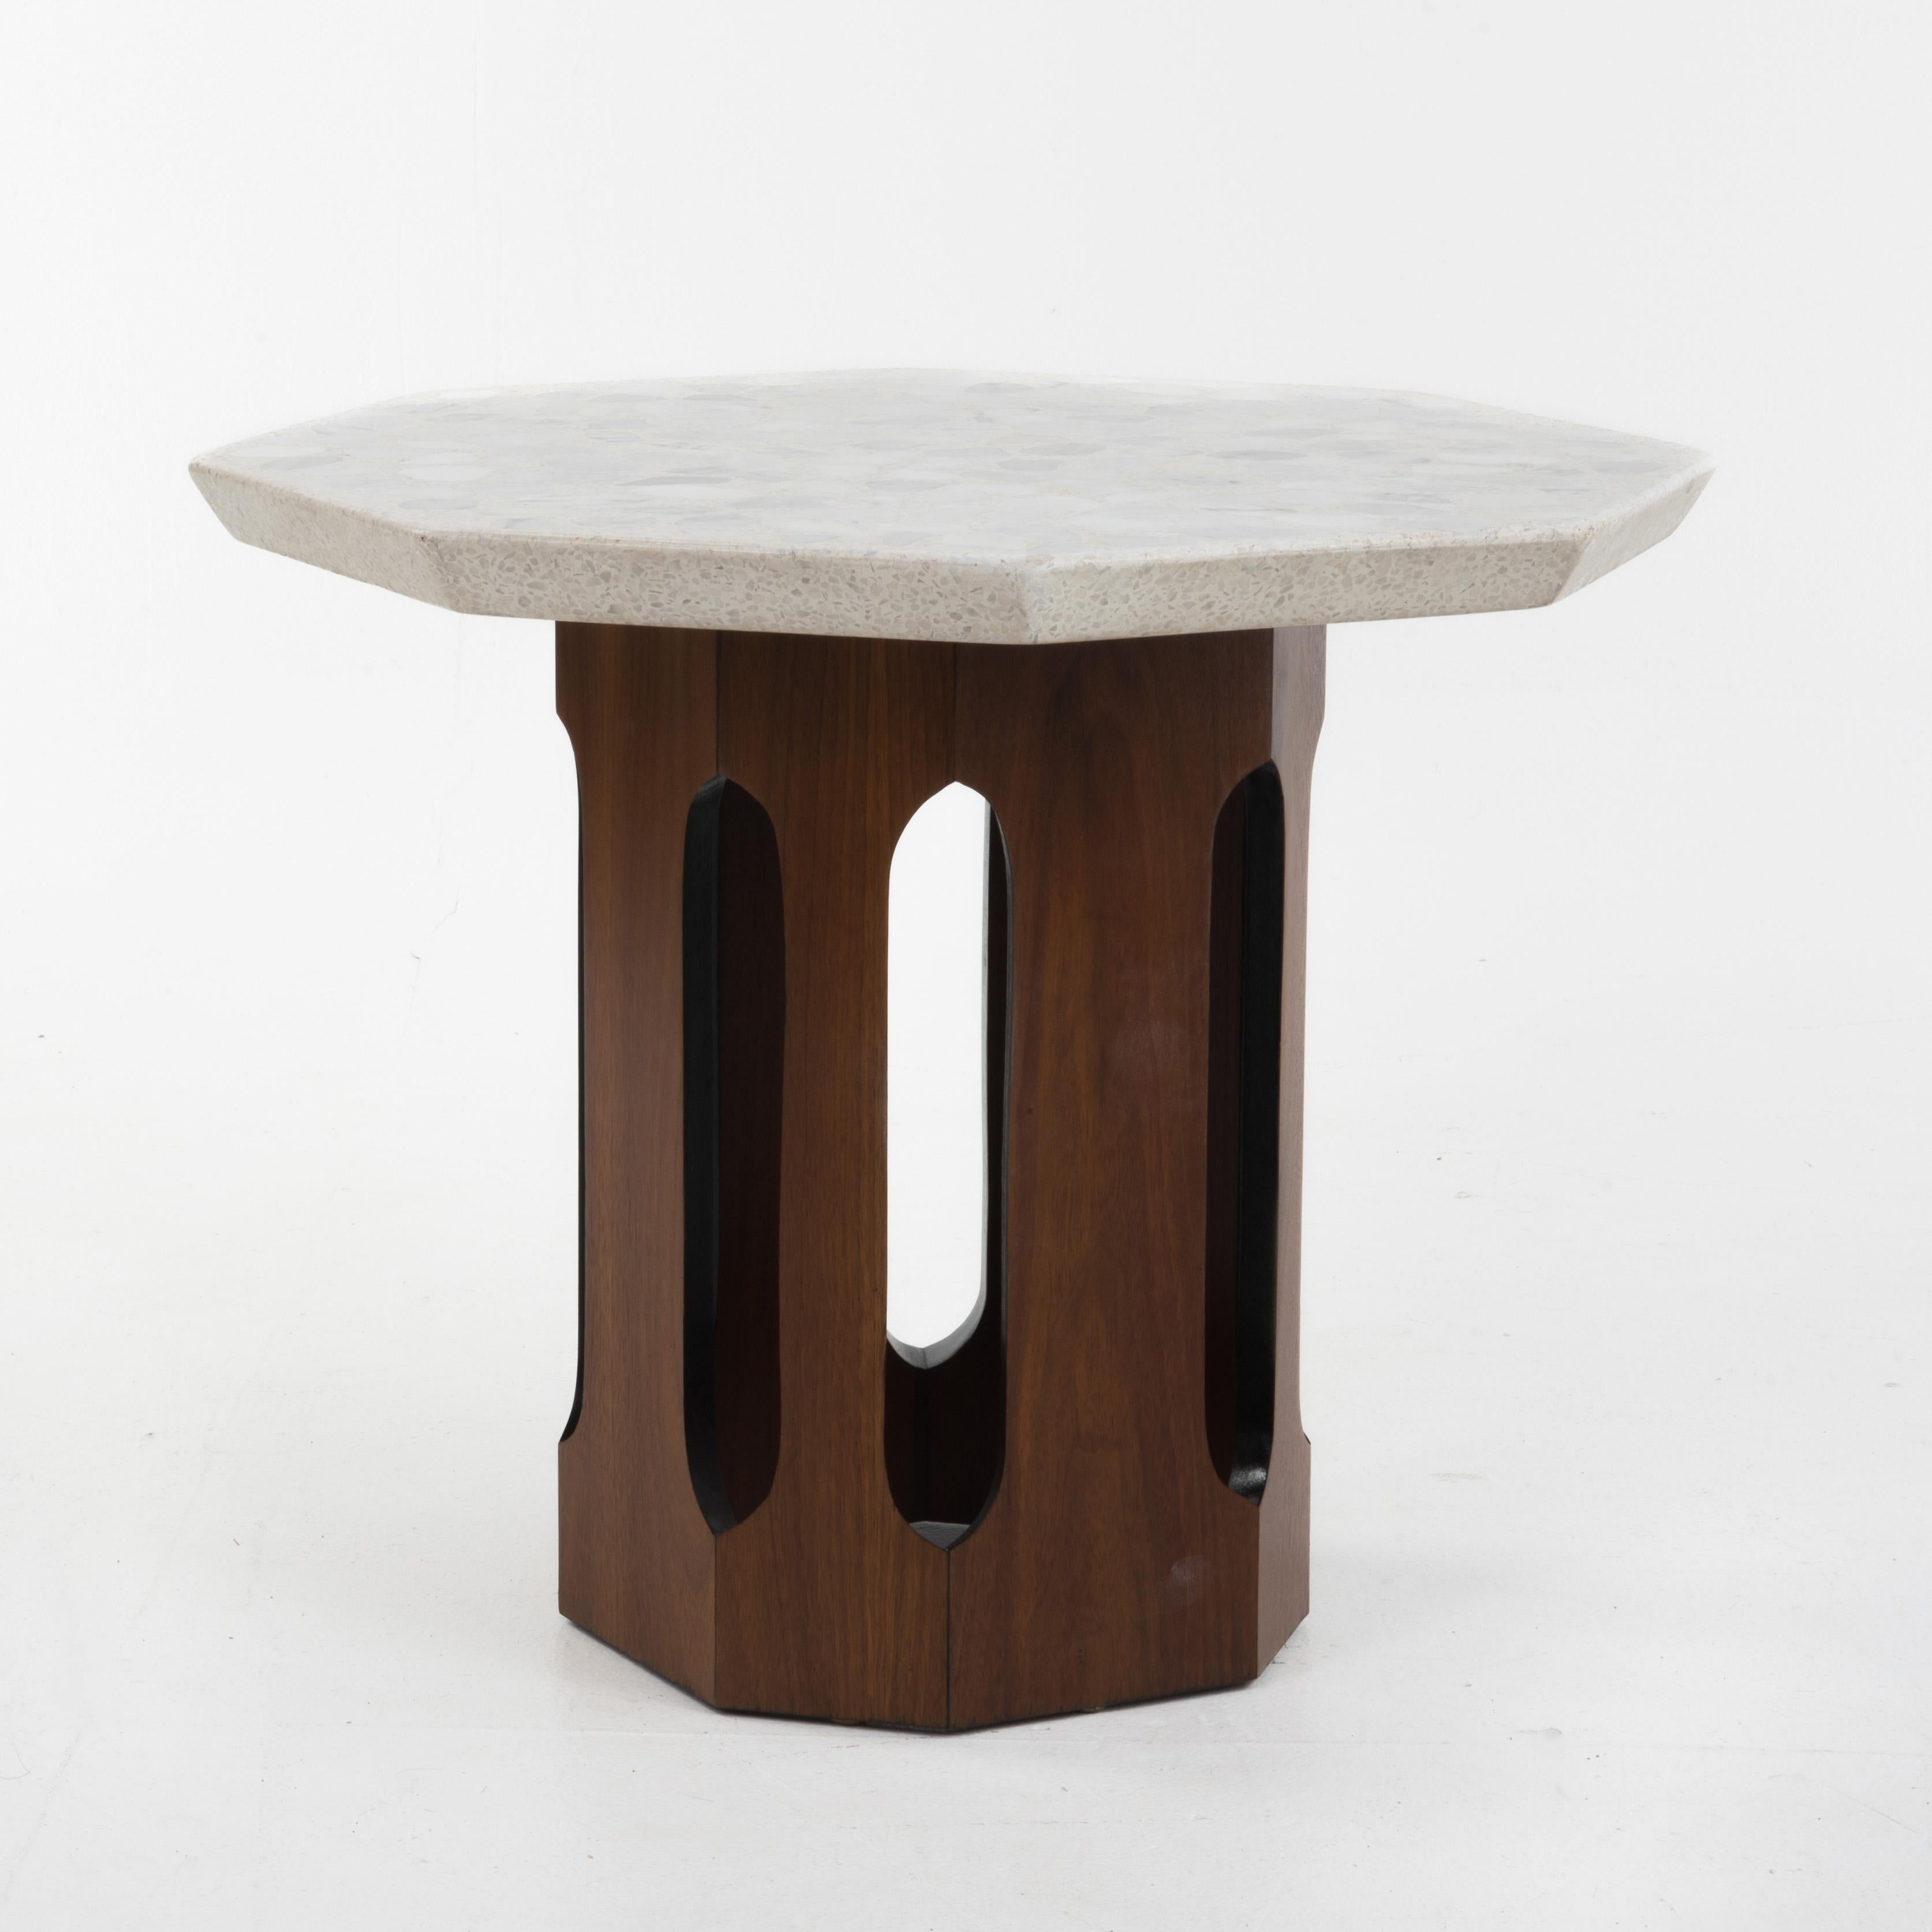 Harvey Probber Terrazzo Travertine Stone Walnut Side Tables Octagon - A Pair For Sale 4